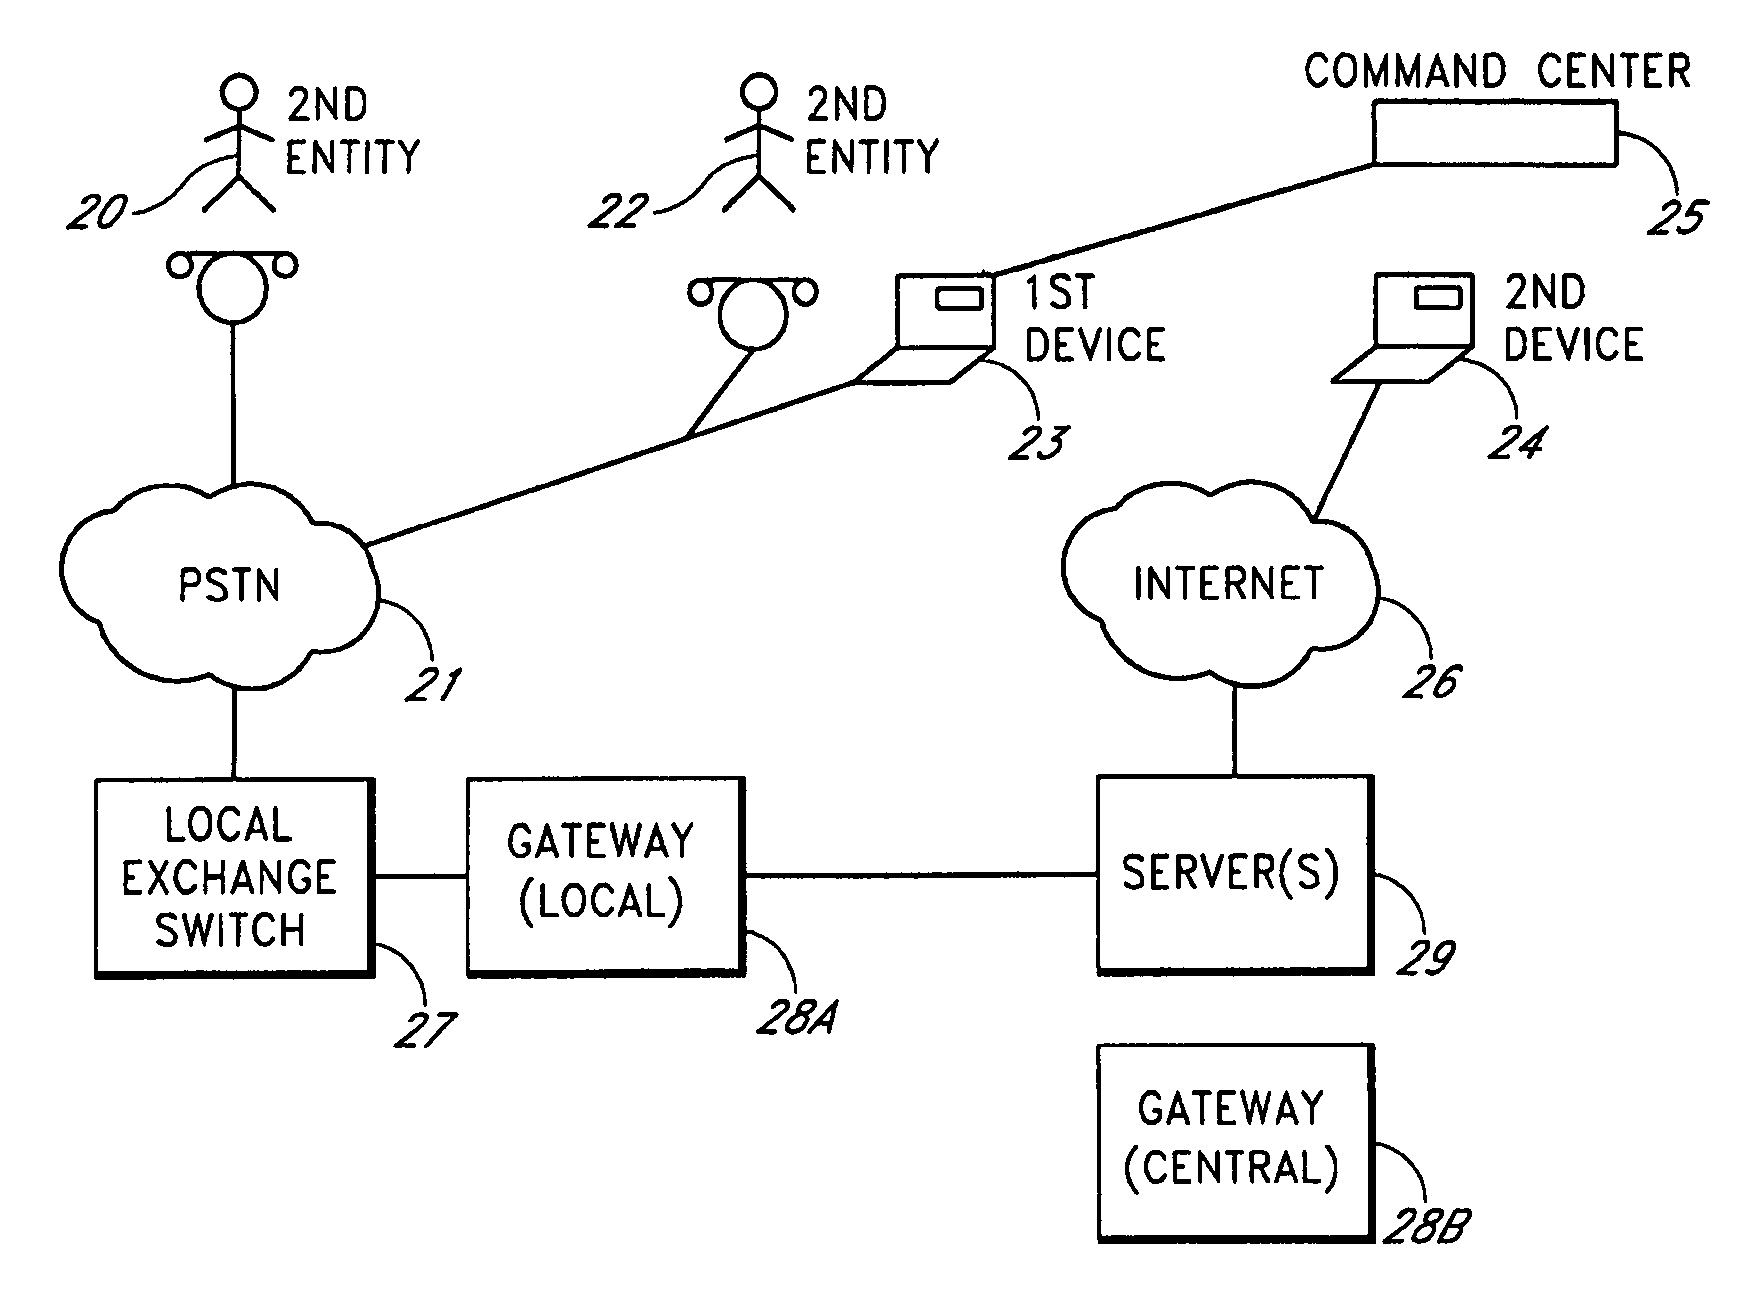 Methods and apparatus for providing expanded telecommunications service